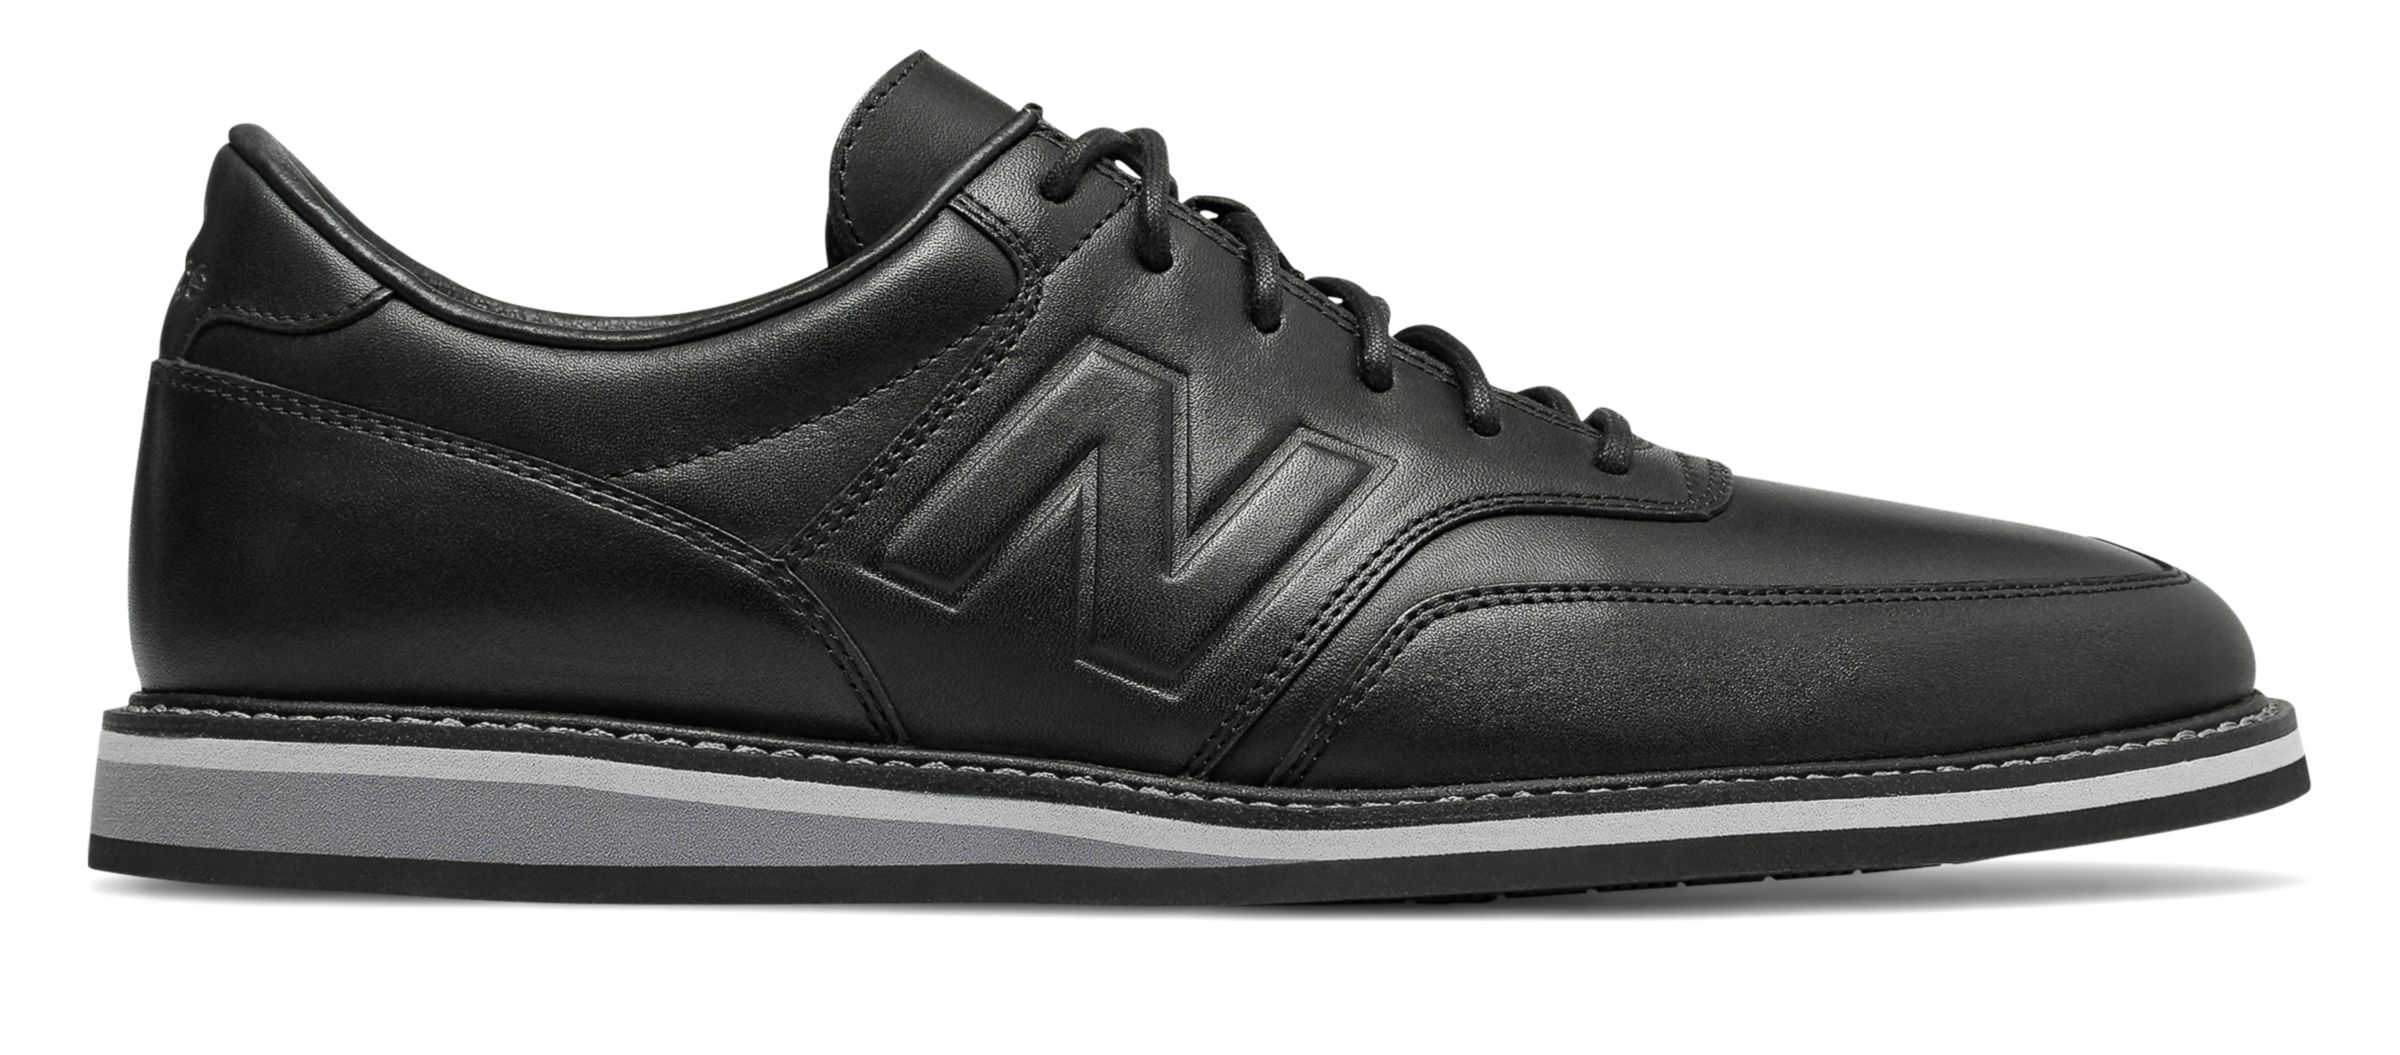 Casual Dress Shoes for Men - New Balance